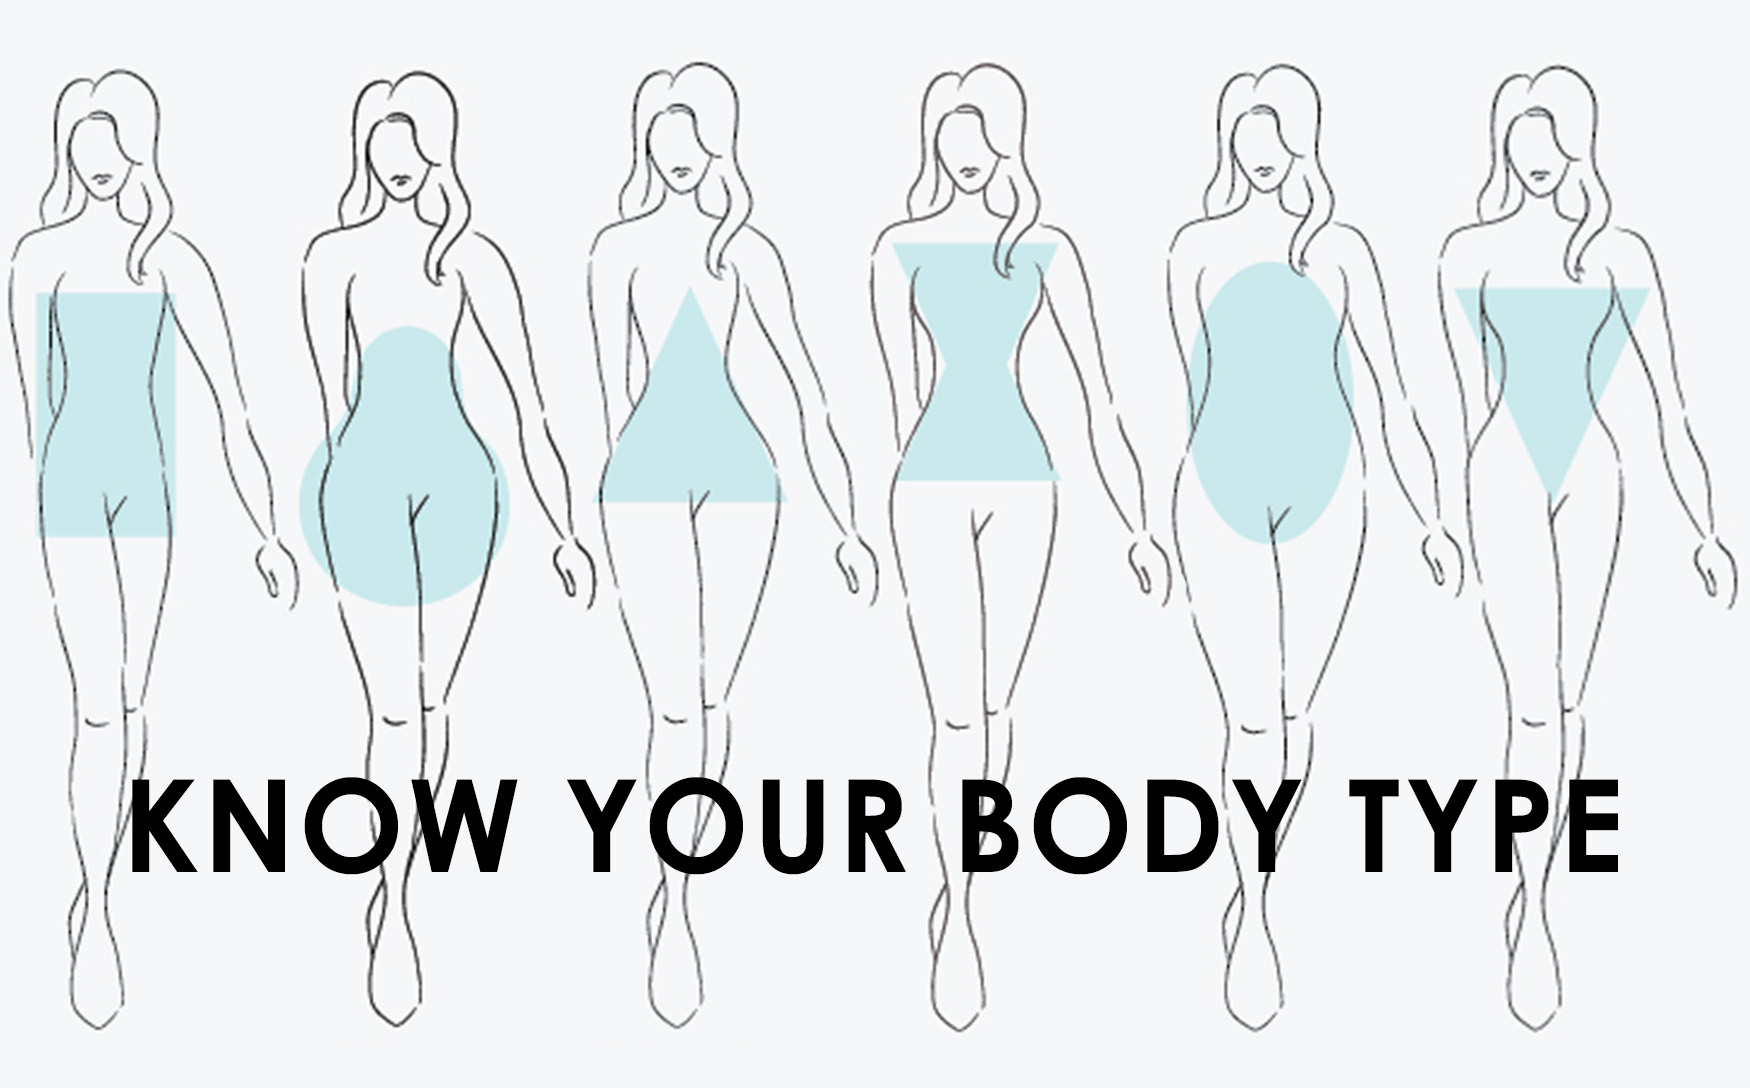 https://luxenc.com/wp-content/uploads/2019/04/Know-Your-Body-Type.jpg